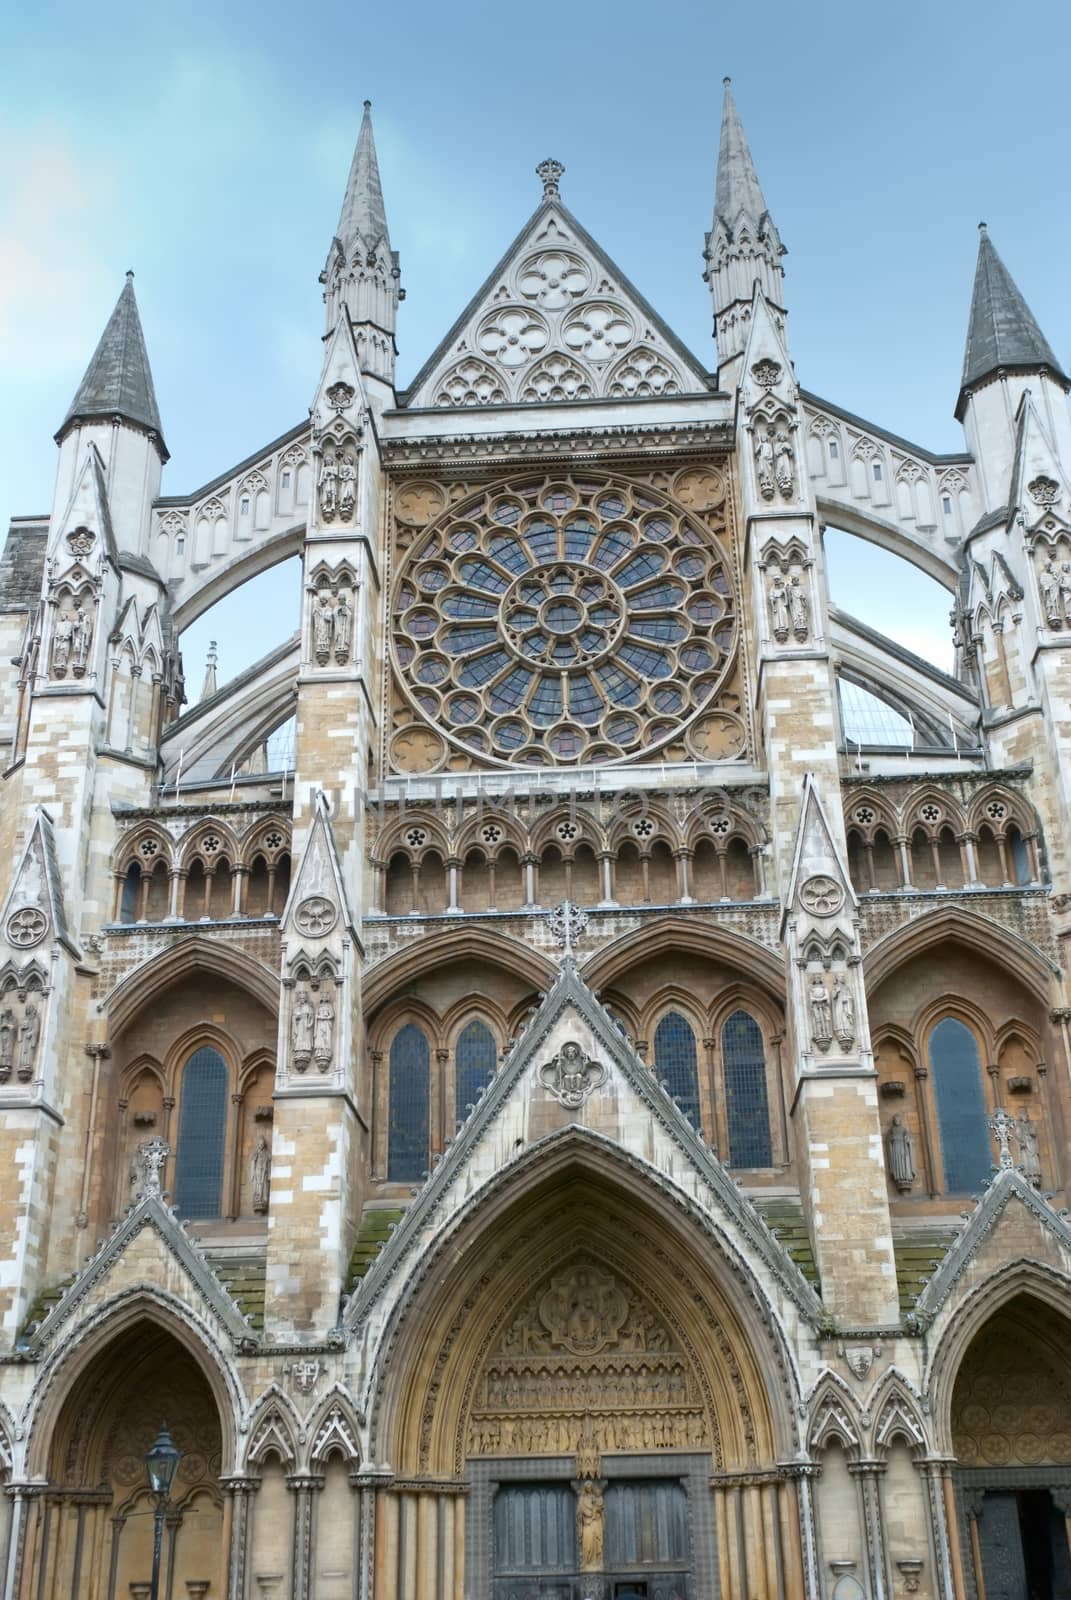 Westminster Abbey in London England, detail